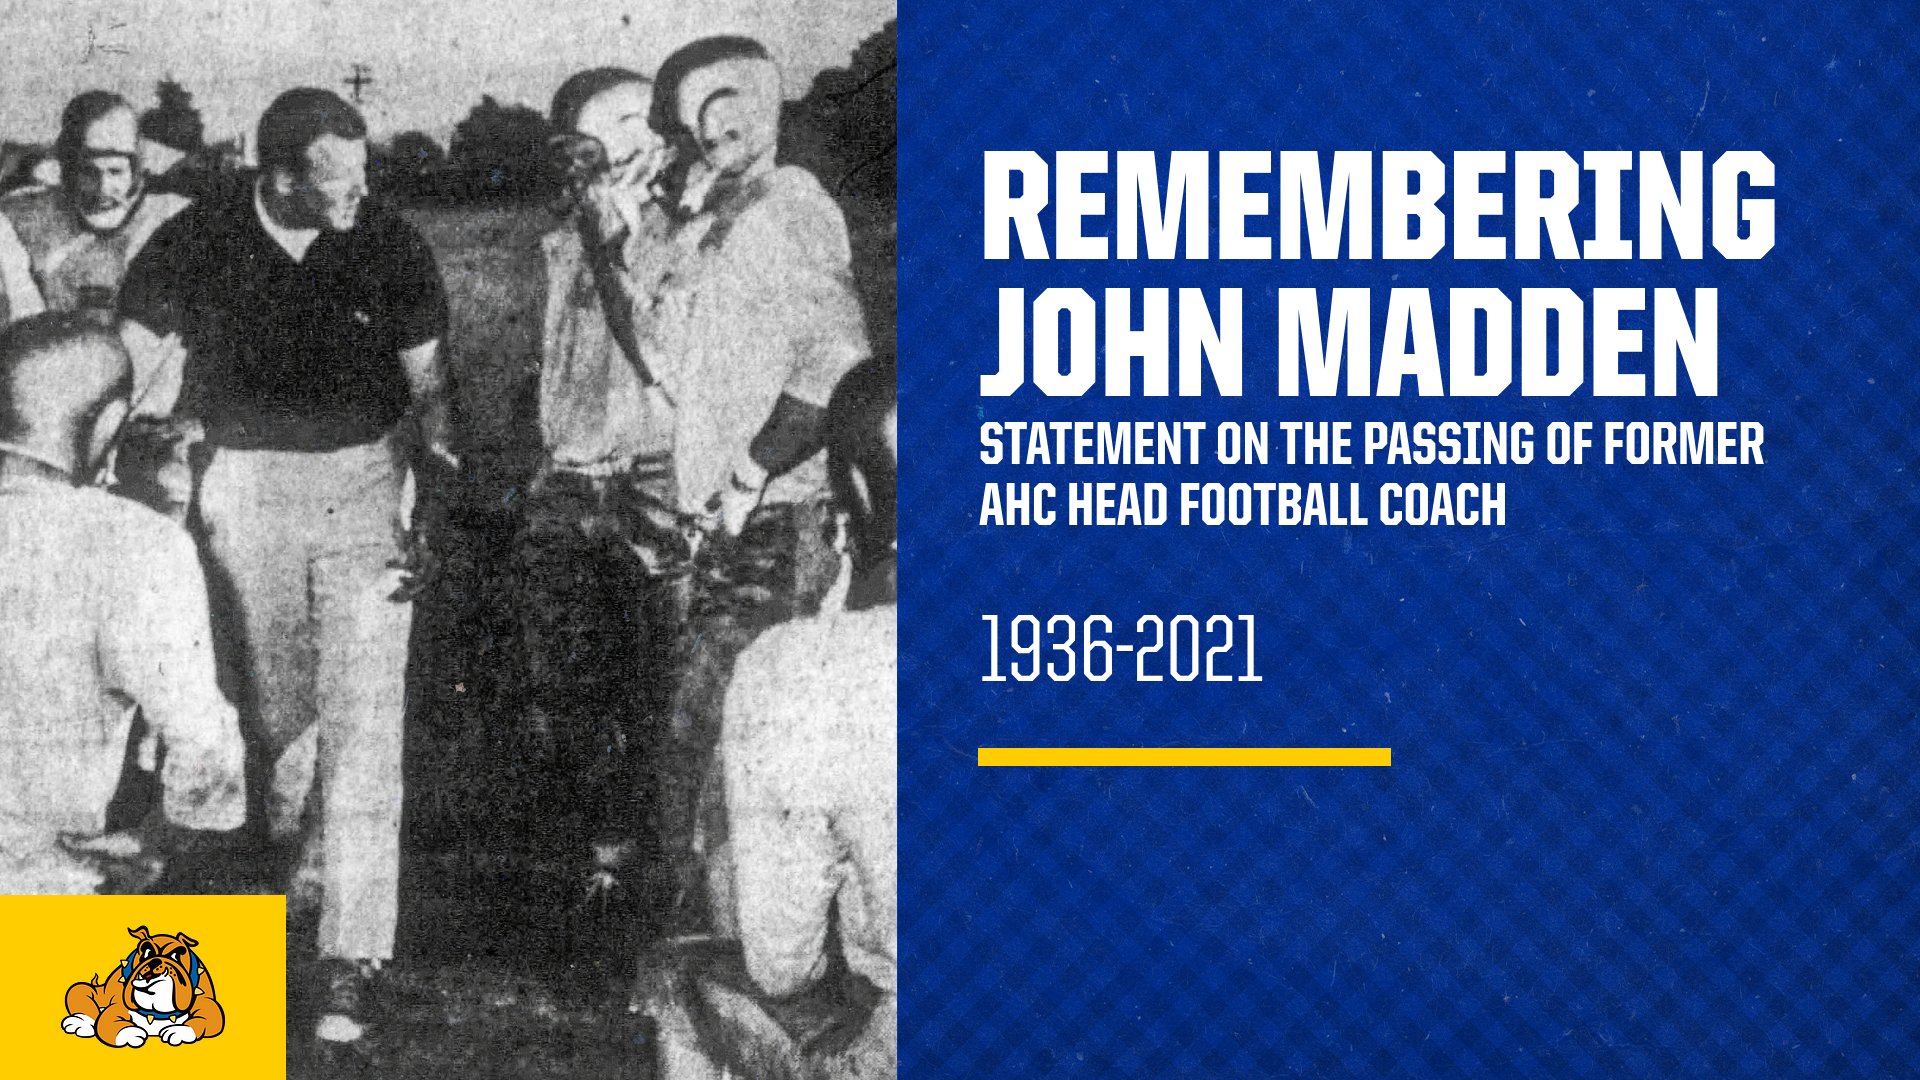 Statement on the Passing of John Madden